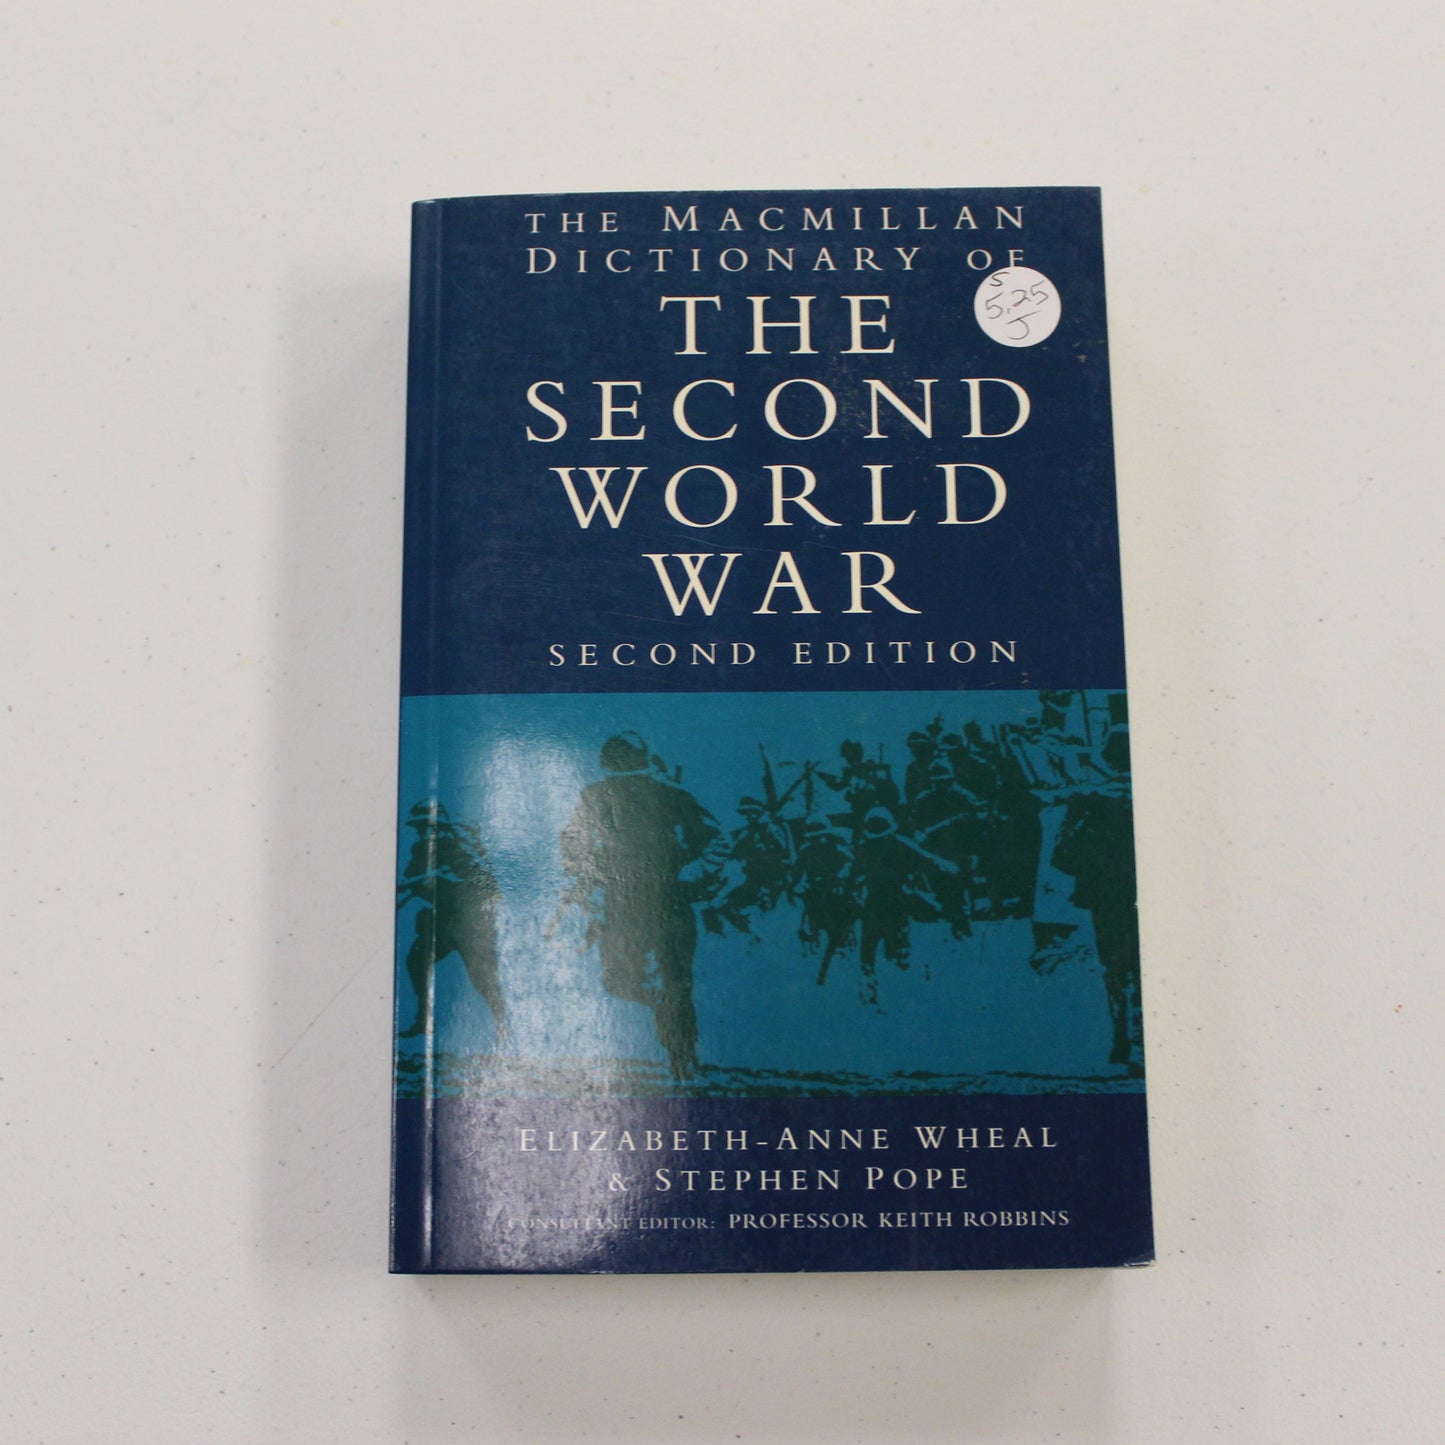 THE MACMILLAN DICTIONARY OF THE SECOND WORLD WAR